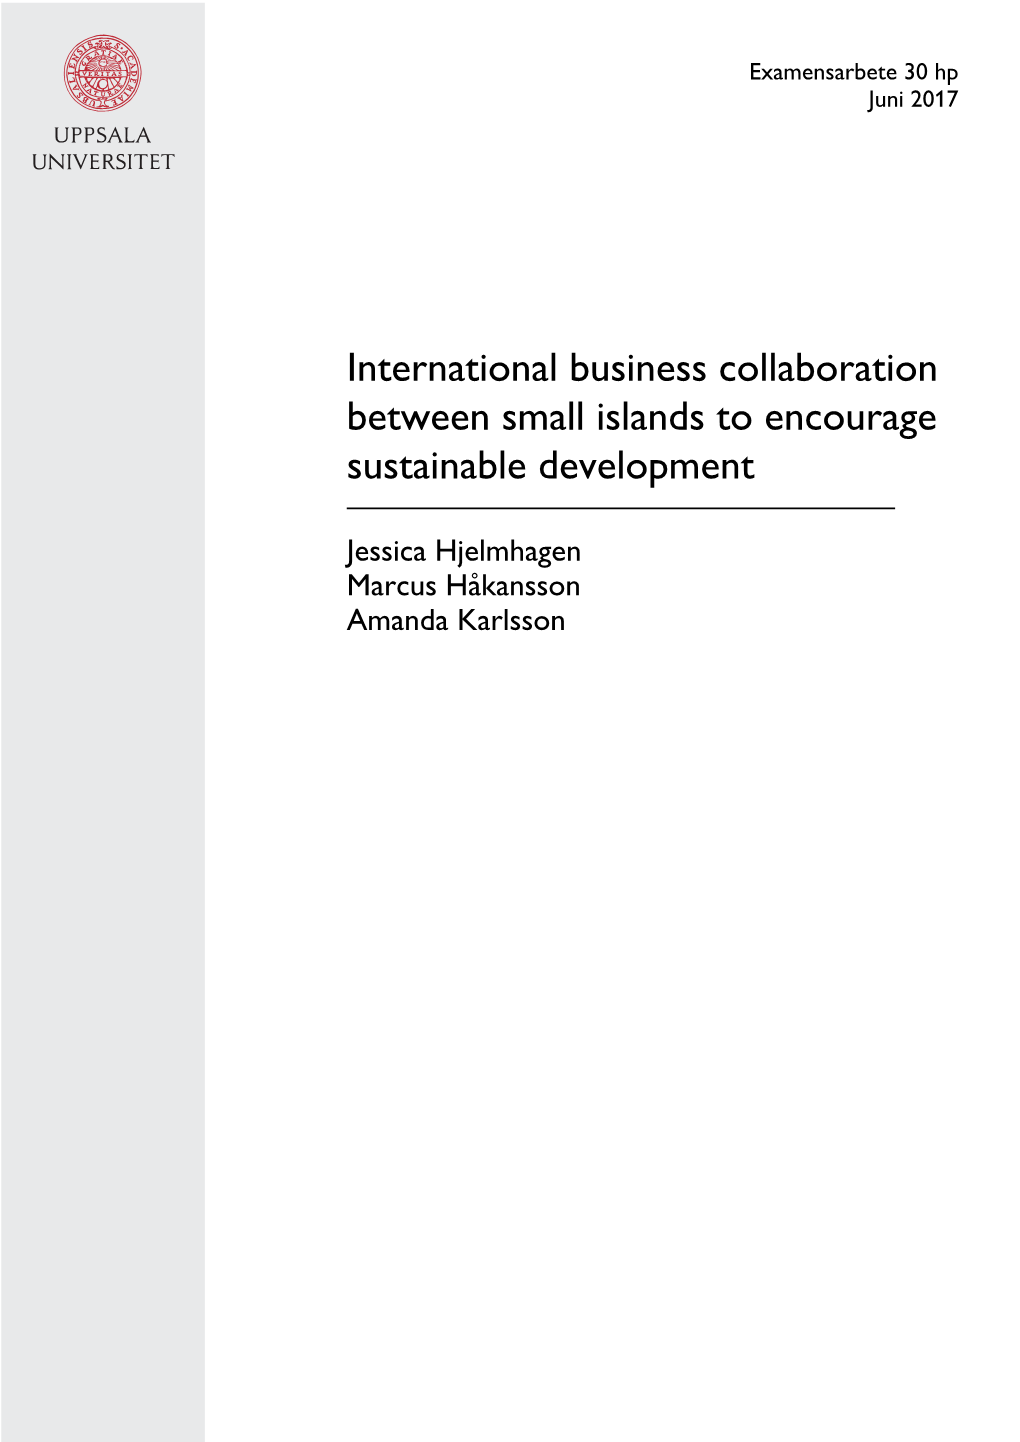 International Business Collaboration Between Small Islands to Encourage Sustainable Development